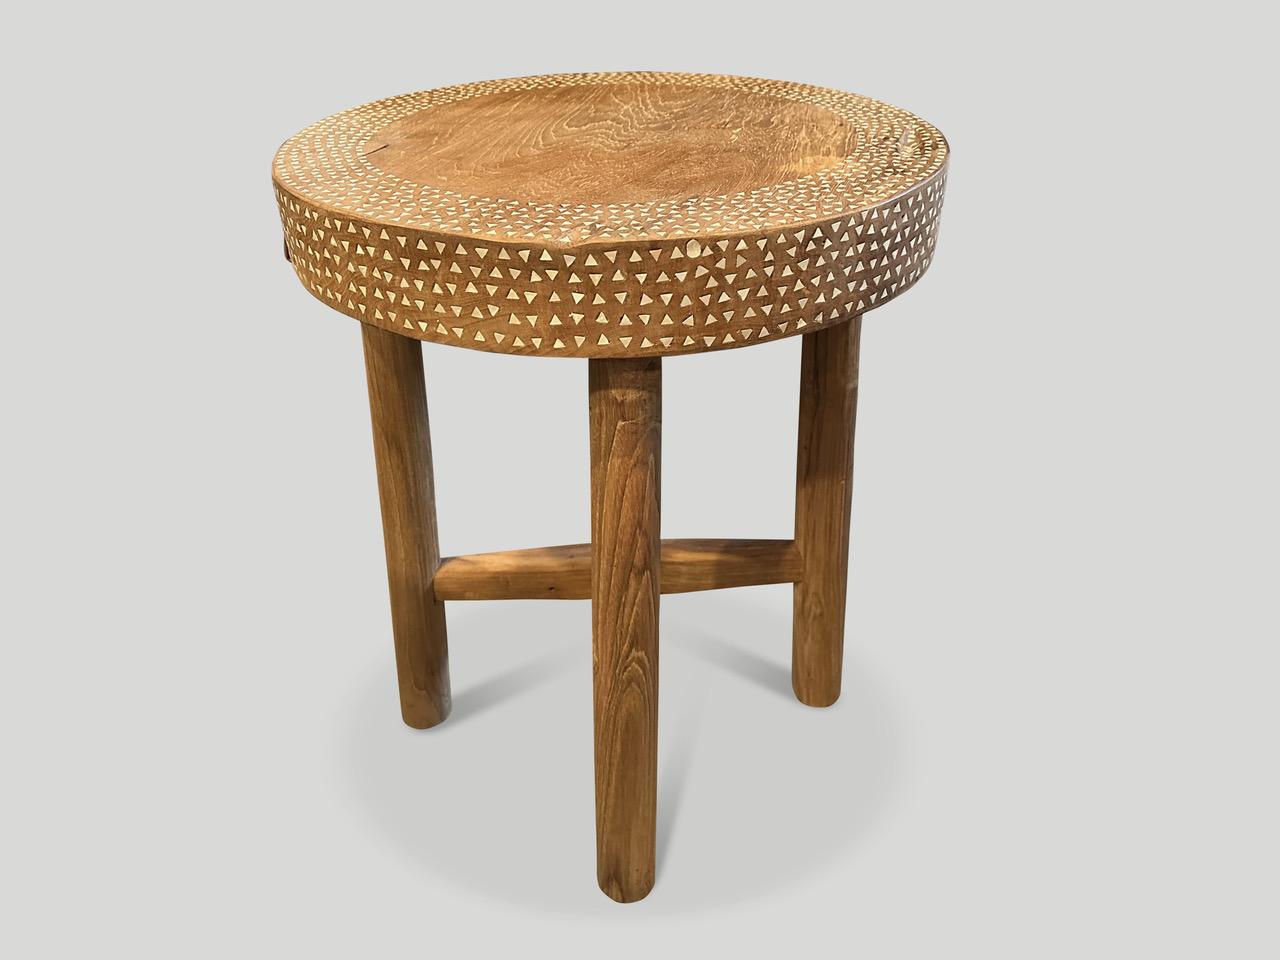 Beautiful shell inlaid side table or pedestal hand made from reclaimed teak wood. Each piece of white shell is carefully hand cut and applied to create this stunning table with a 3.5” thick top. We added a minimalist cross base. It’s all in the